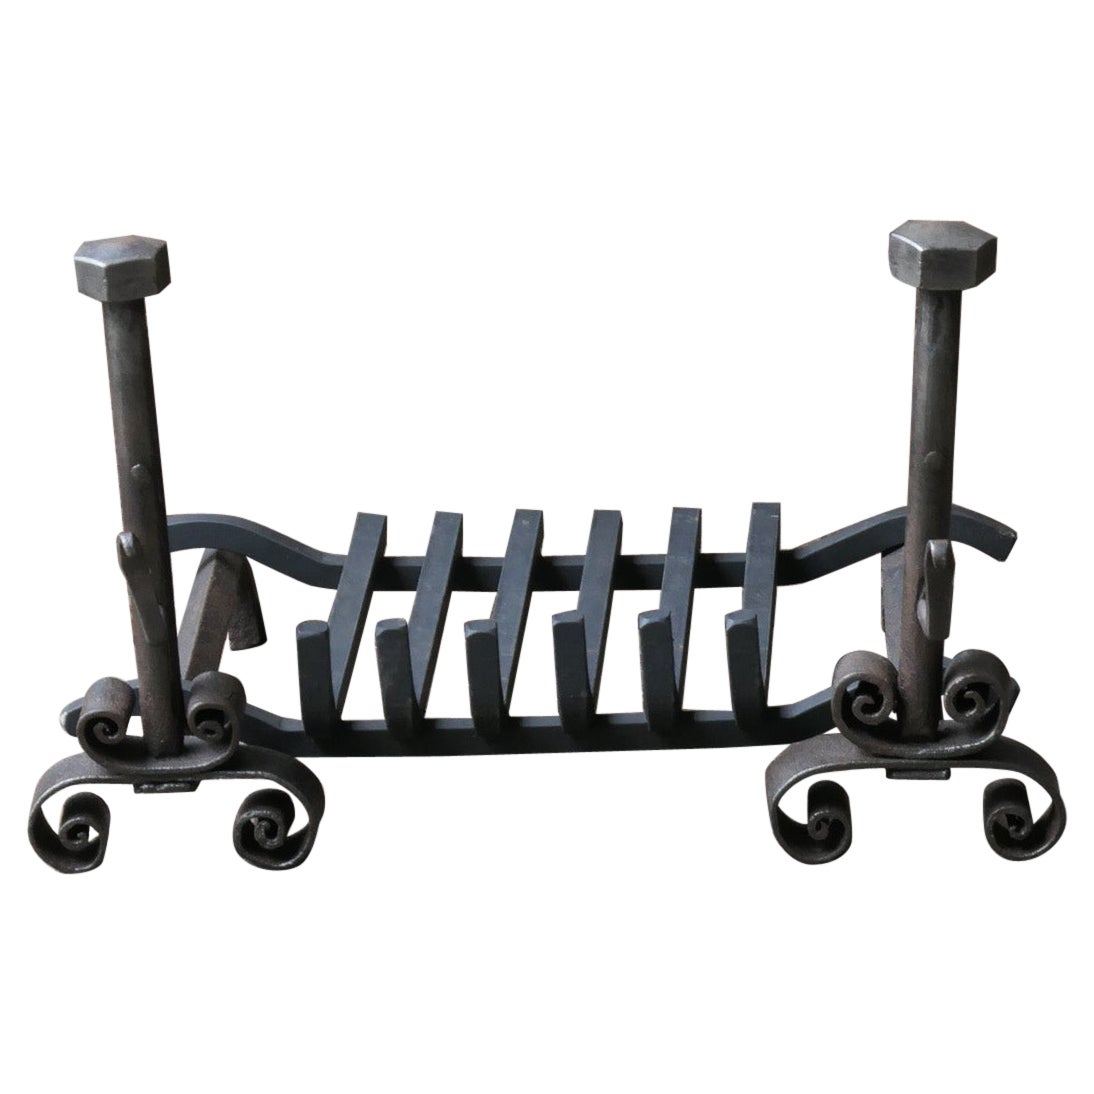 French Louis XV Period Fireplace Grate or Fire Basket, 18th - 19th Century